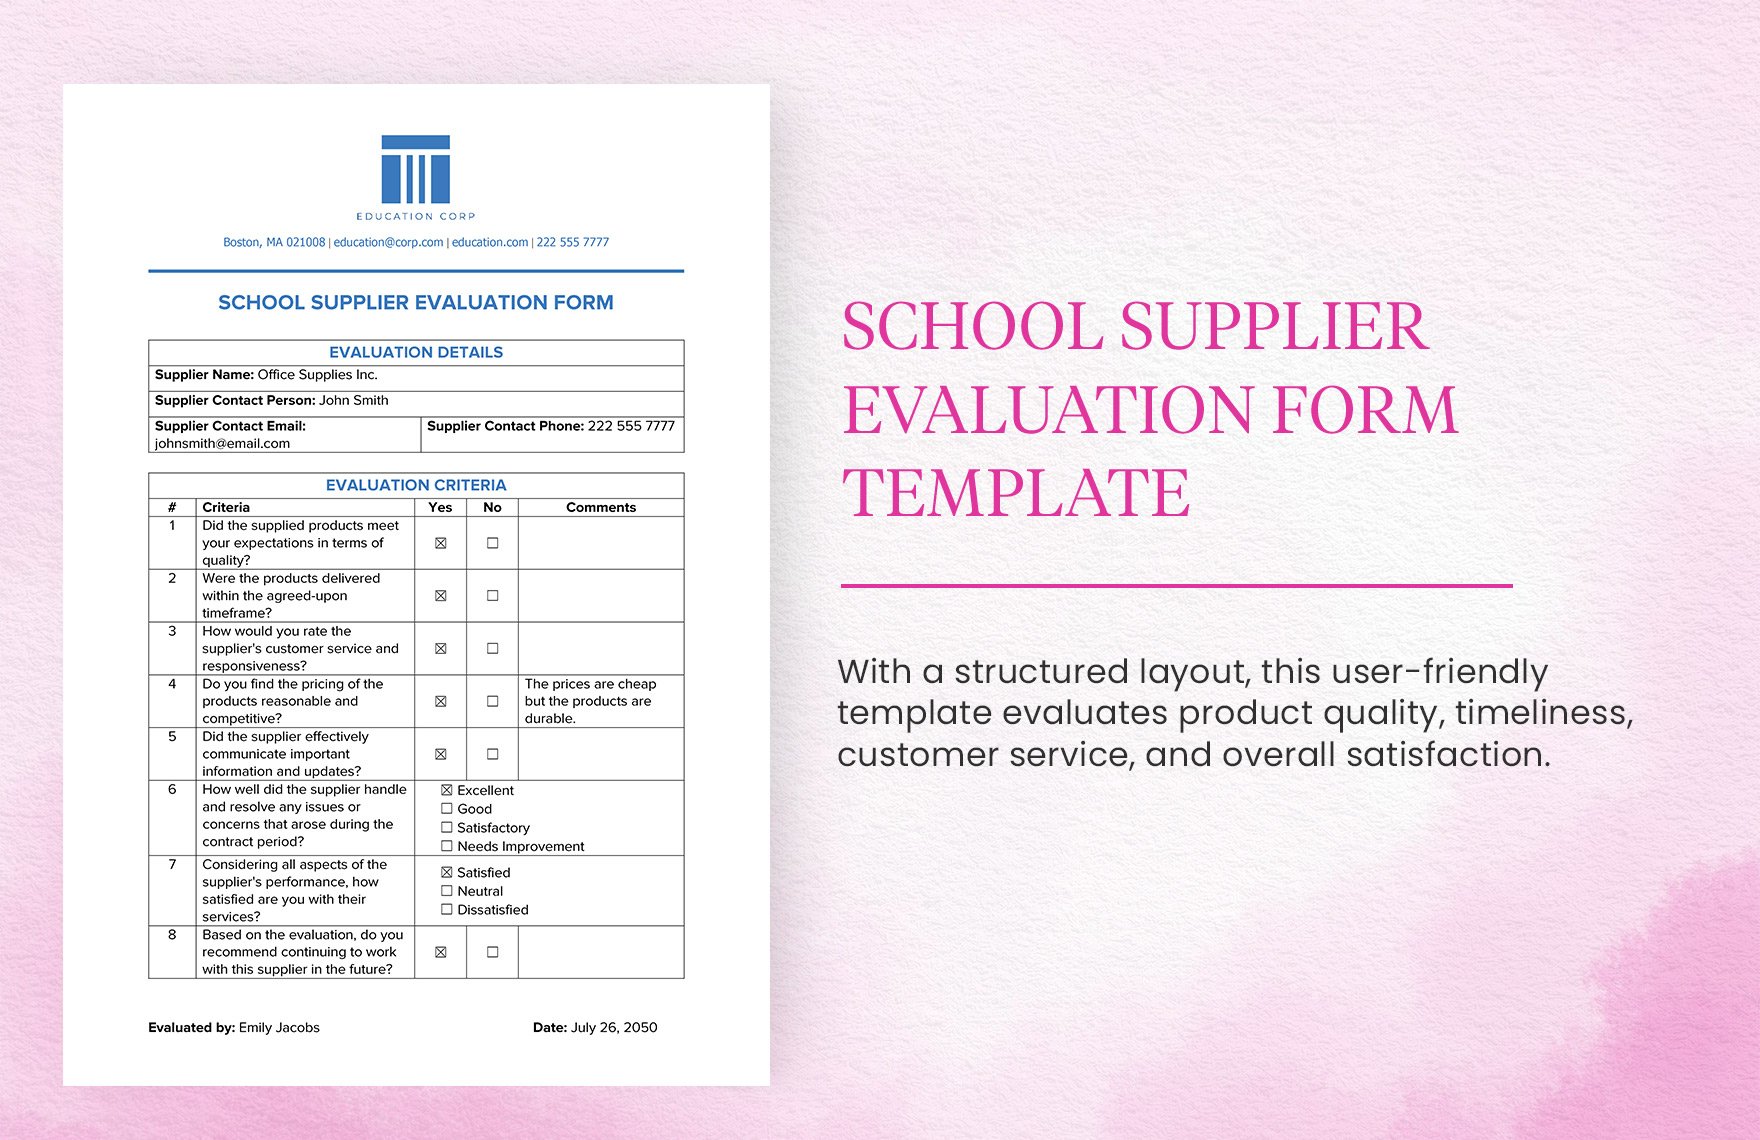 School Supplier Evaluation Form Template in Word, Google Docs, PDF